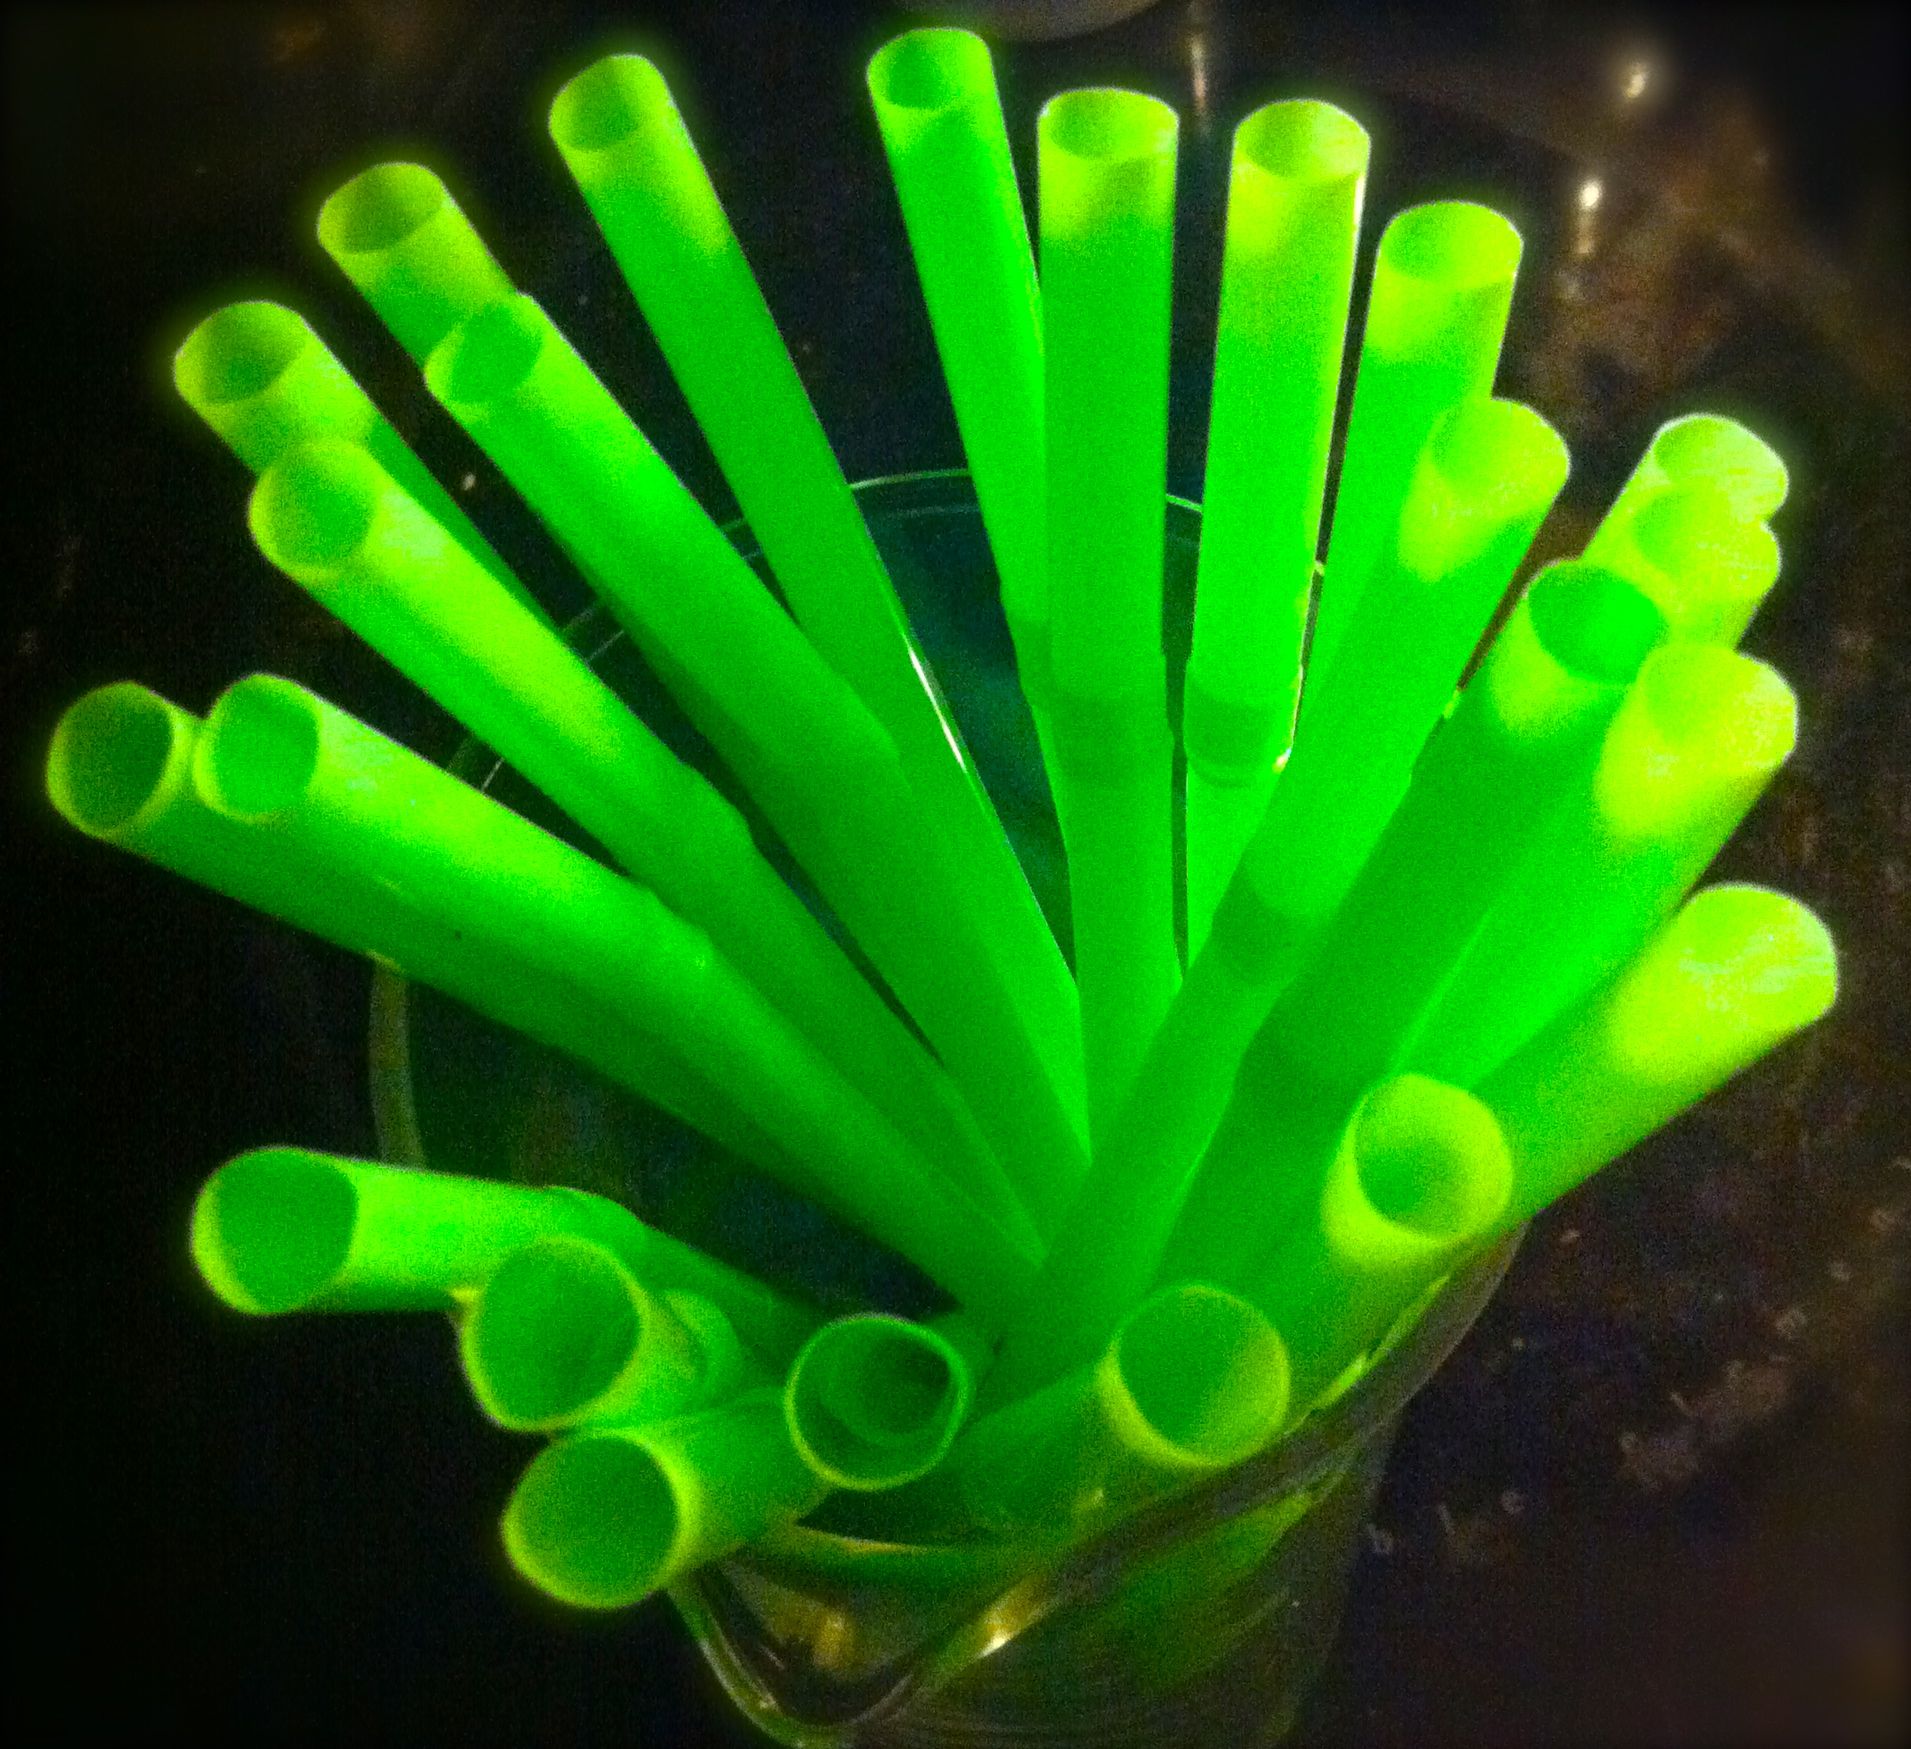 Thoughts on Green Straws 8.28.13 Thought of the Day | ritaLOVEStoWRITE